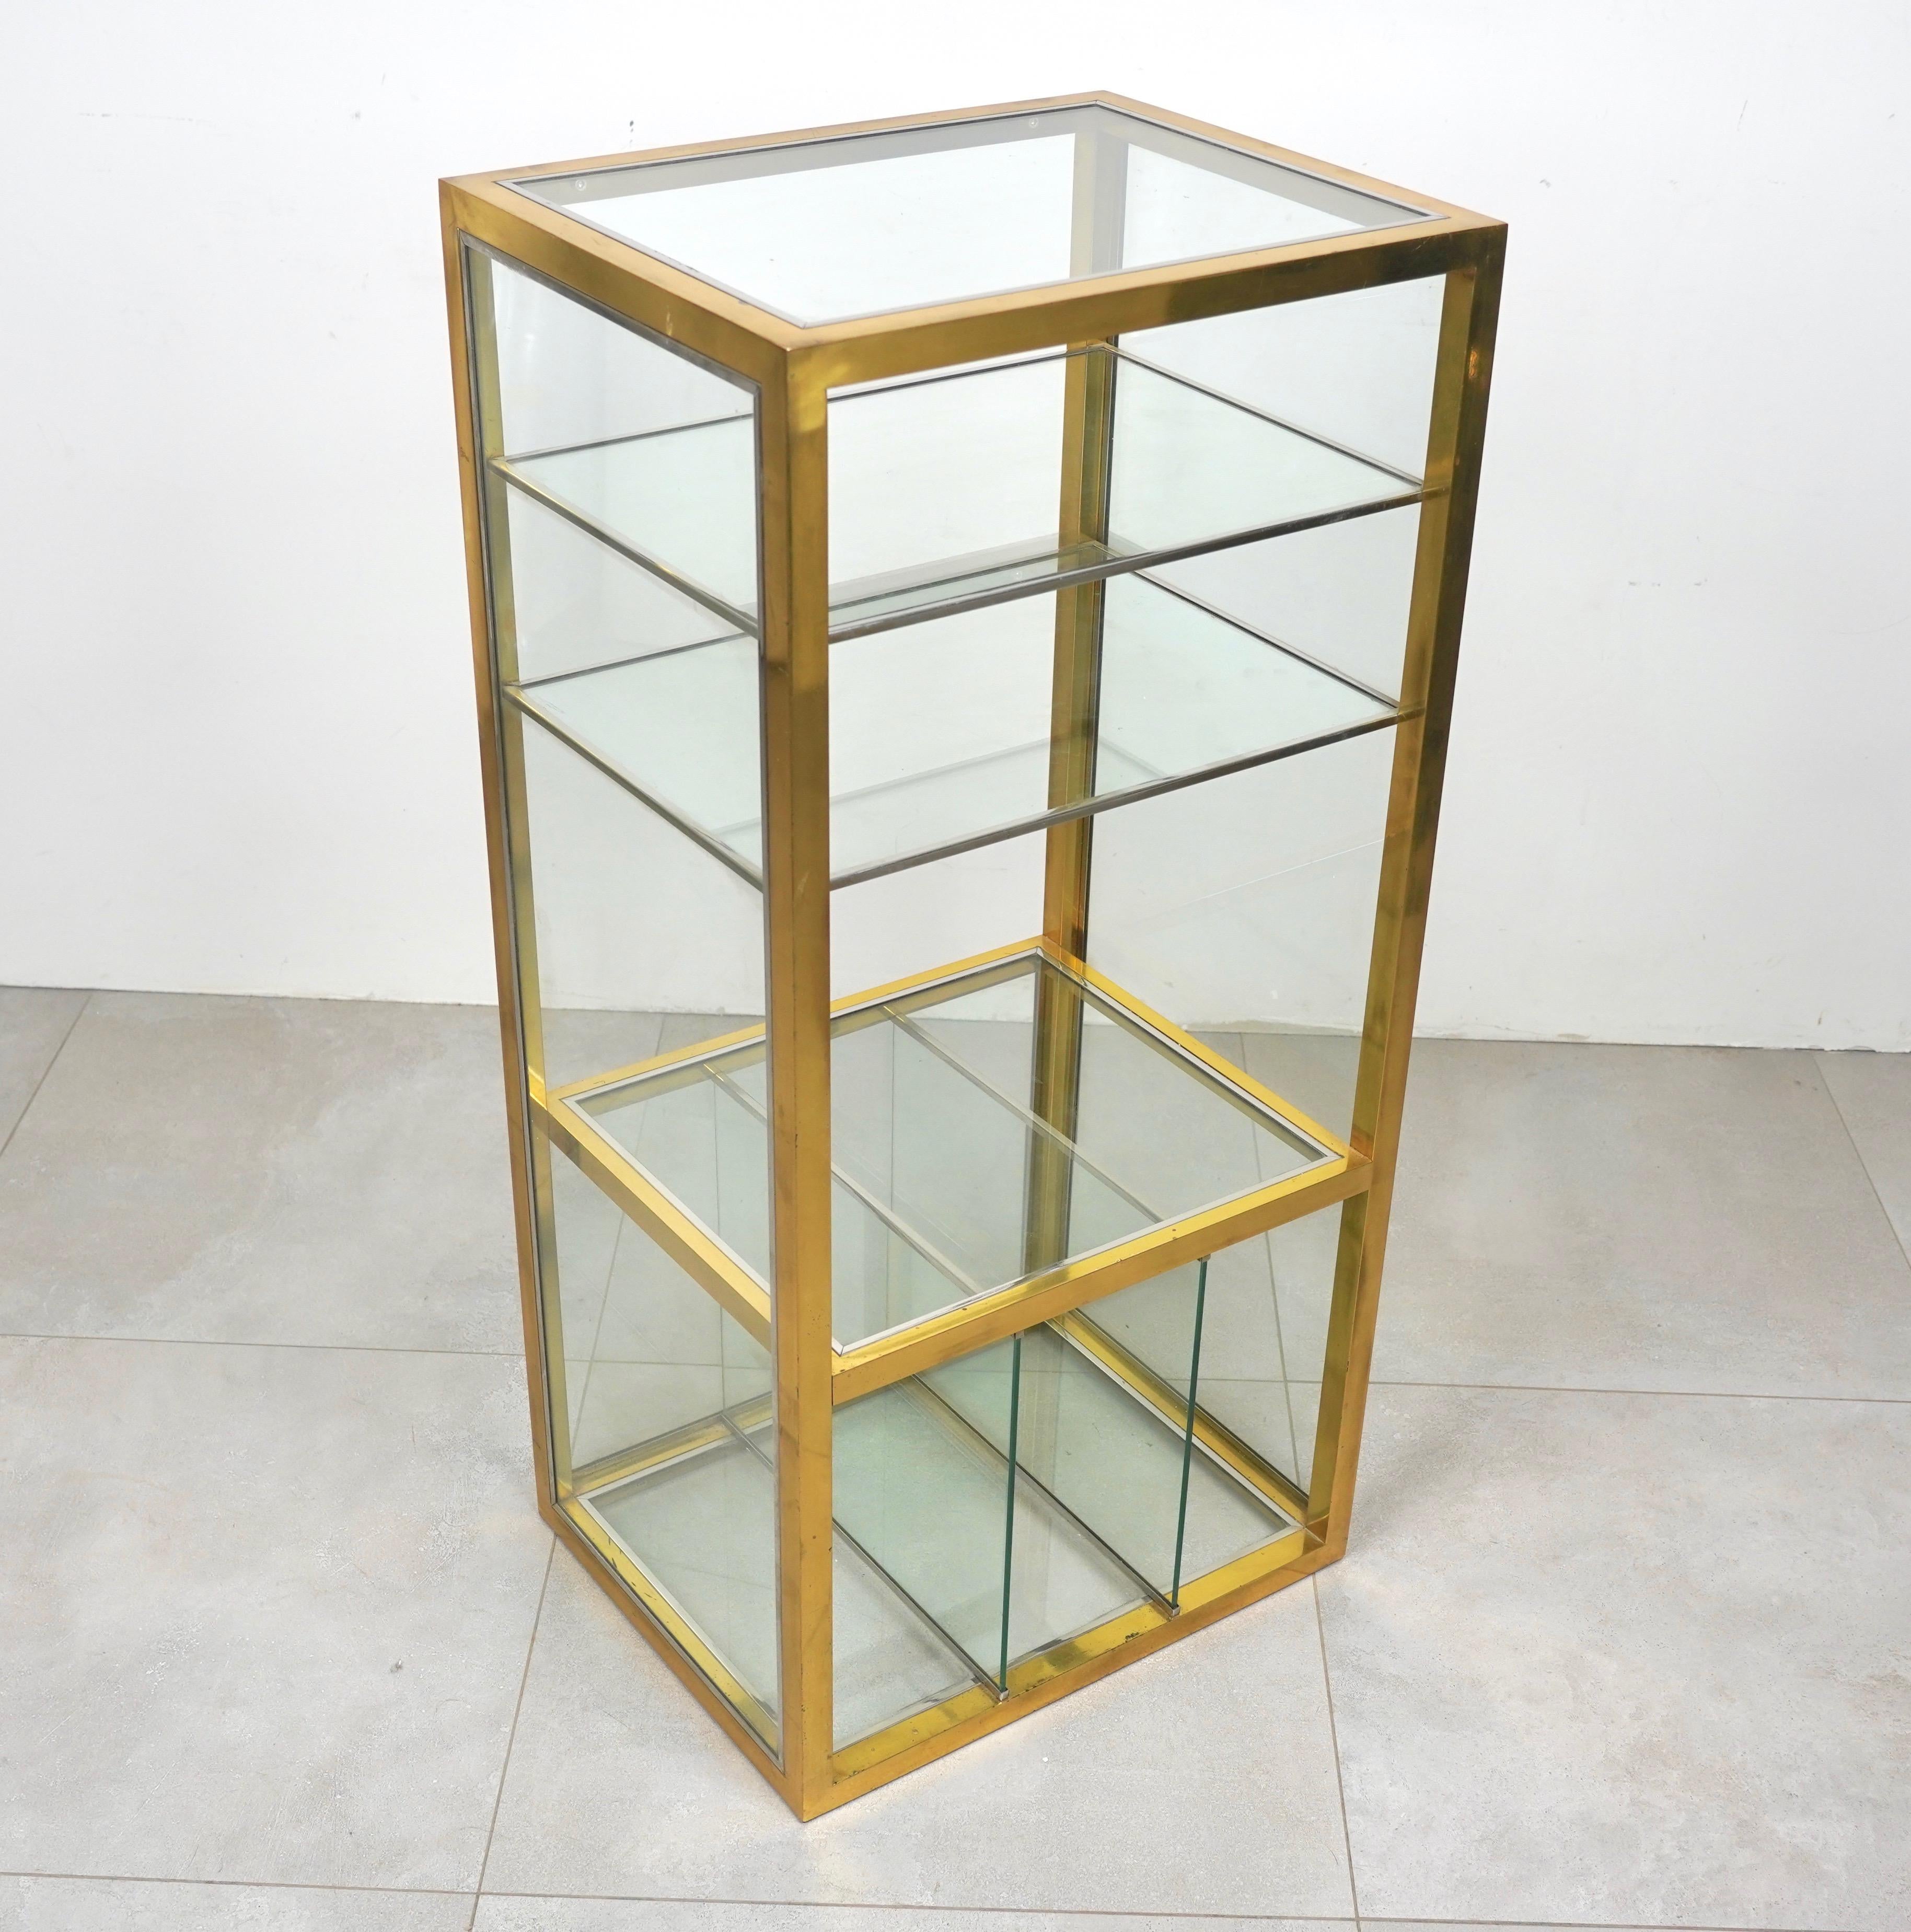 Cabinet etagere in glass featuring a brass structure and chrome details in the style of the Italian designer Renato Levi. 

Made in Italy in the 1970s.